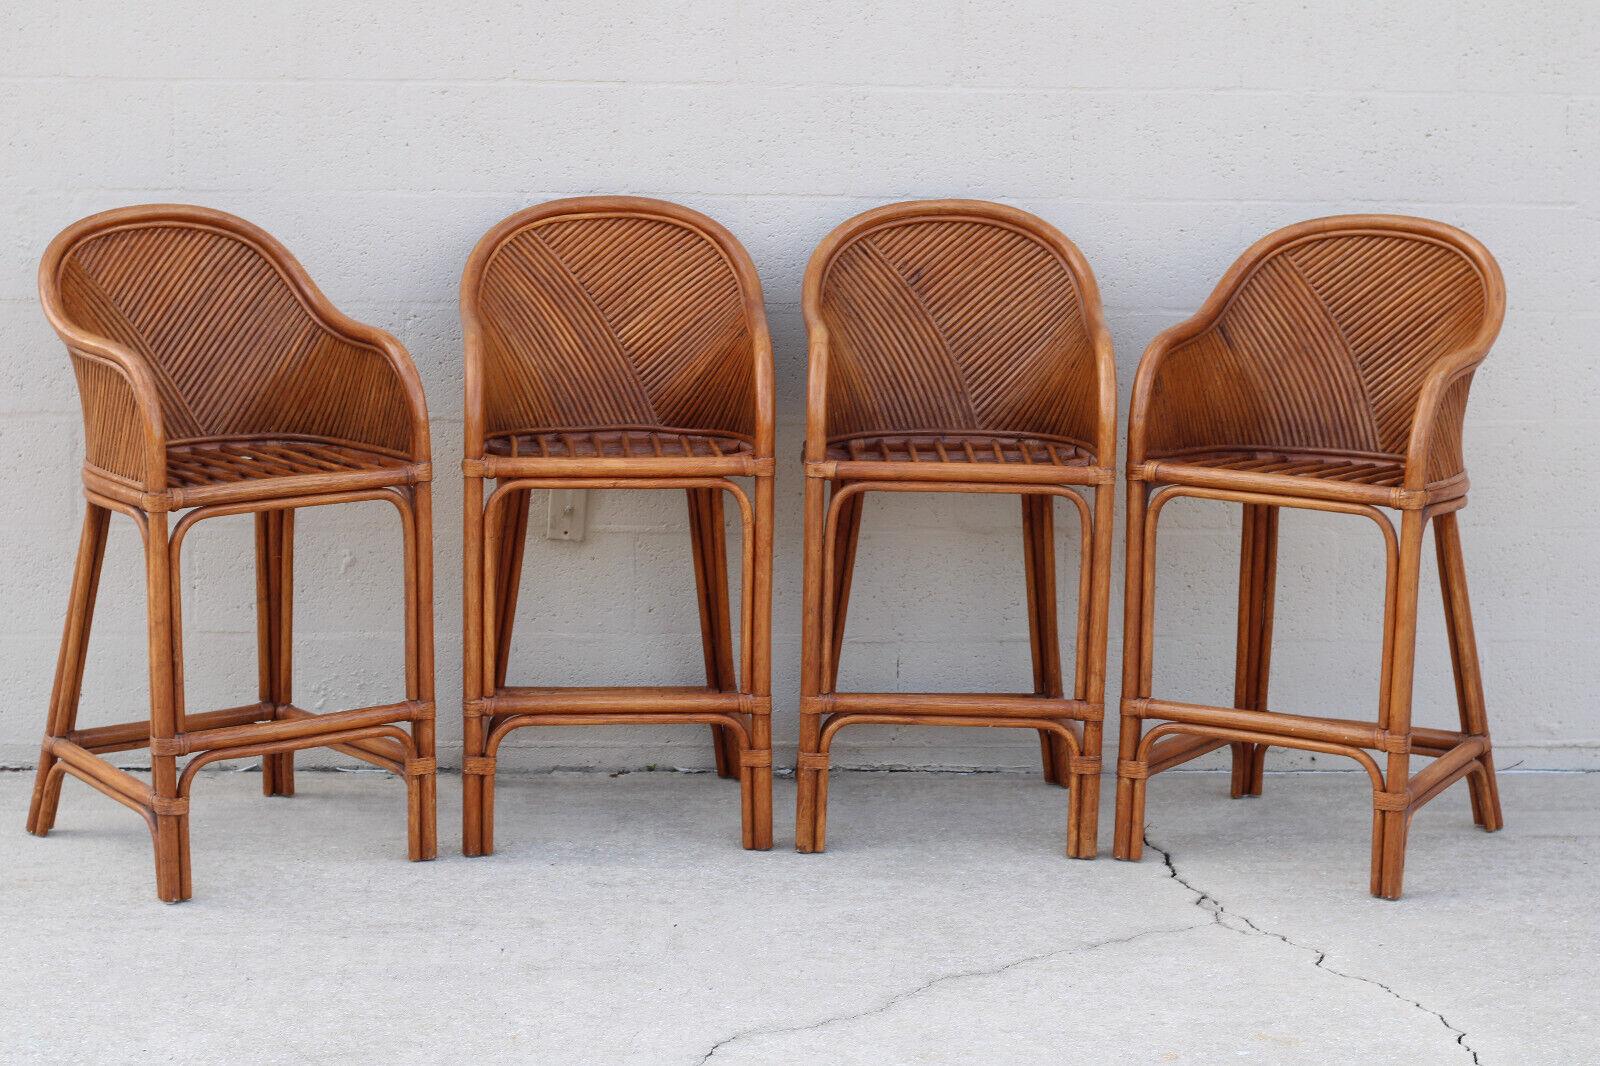 Vintage set of four sculptural pencil reed rattan bar stools. Stools have a rattan frame and feature a barrel-back design, a stick deck, and leather bindings. Hand-crafted and of solid construction, the bar stools are finished in a rich tobacco